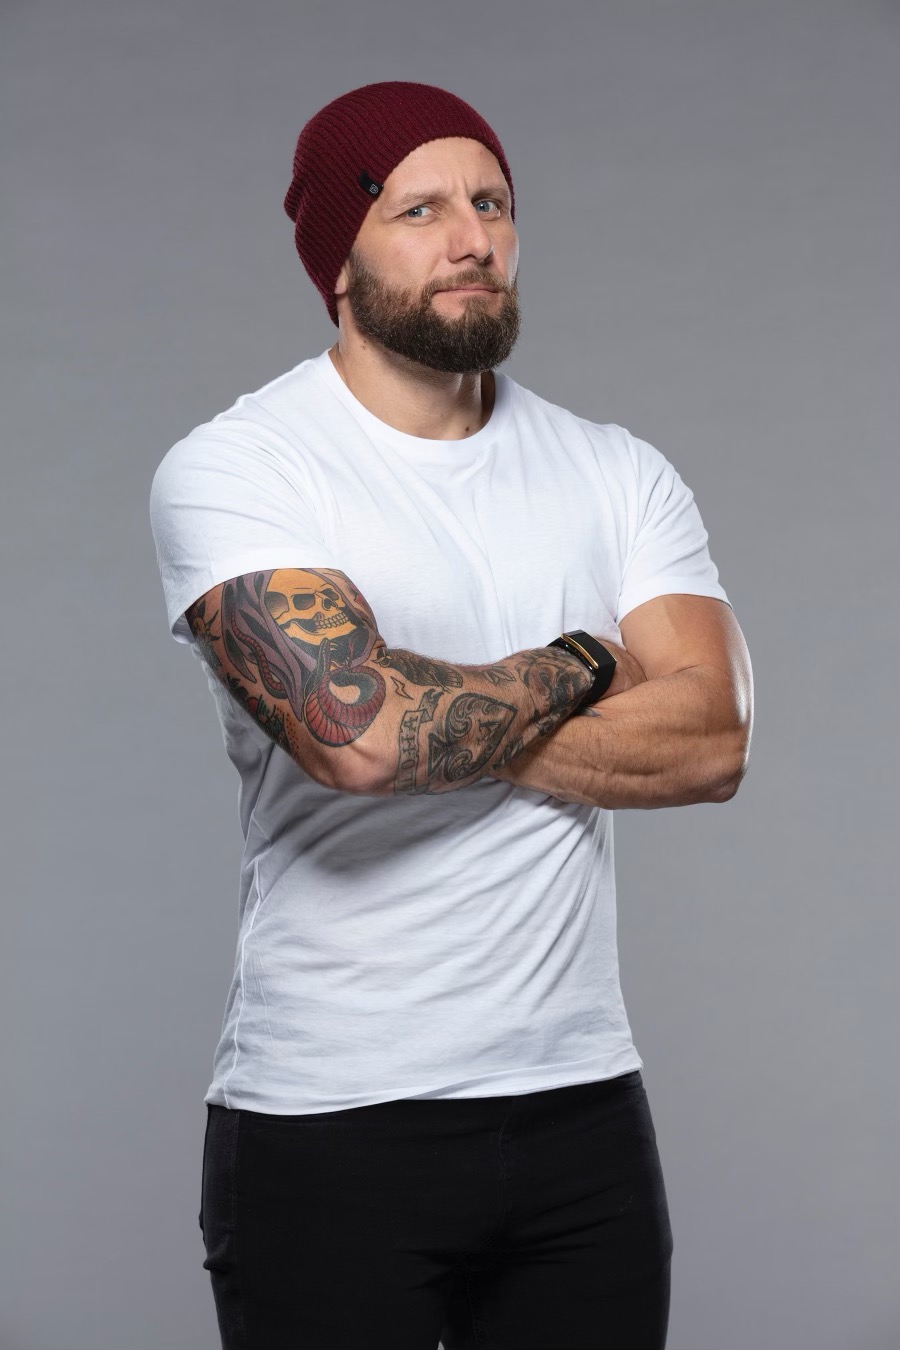 A man with tattoos and a beard wearing white shirt